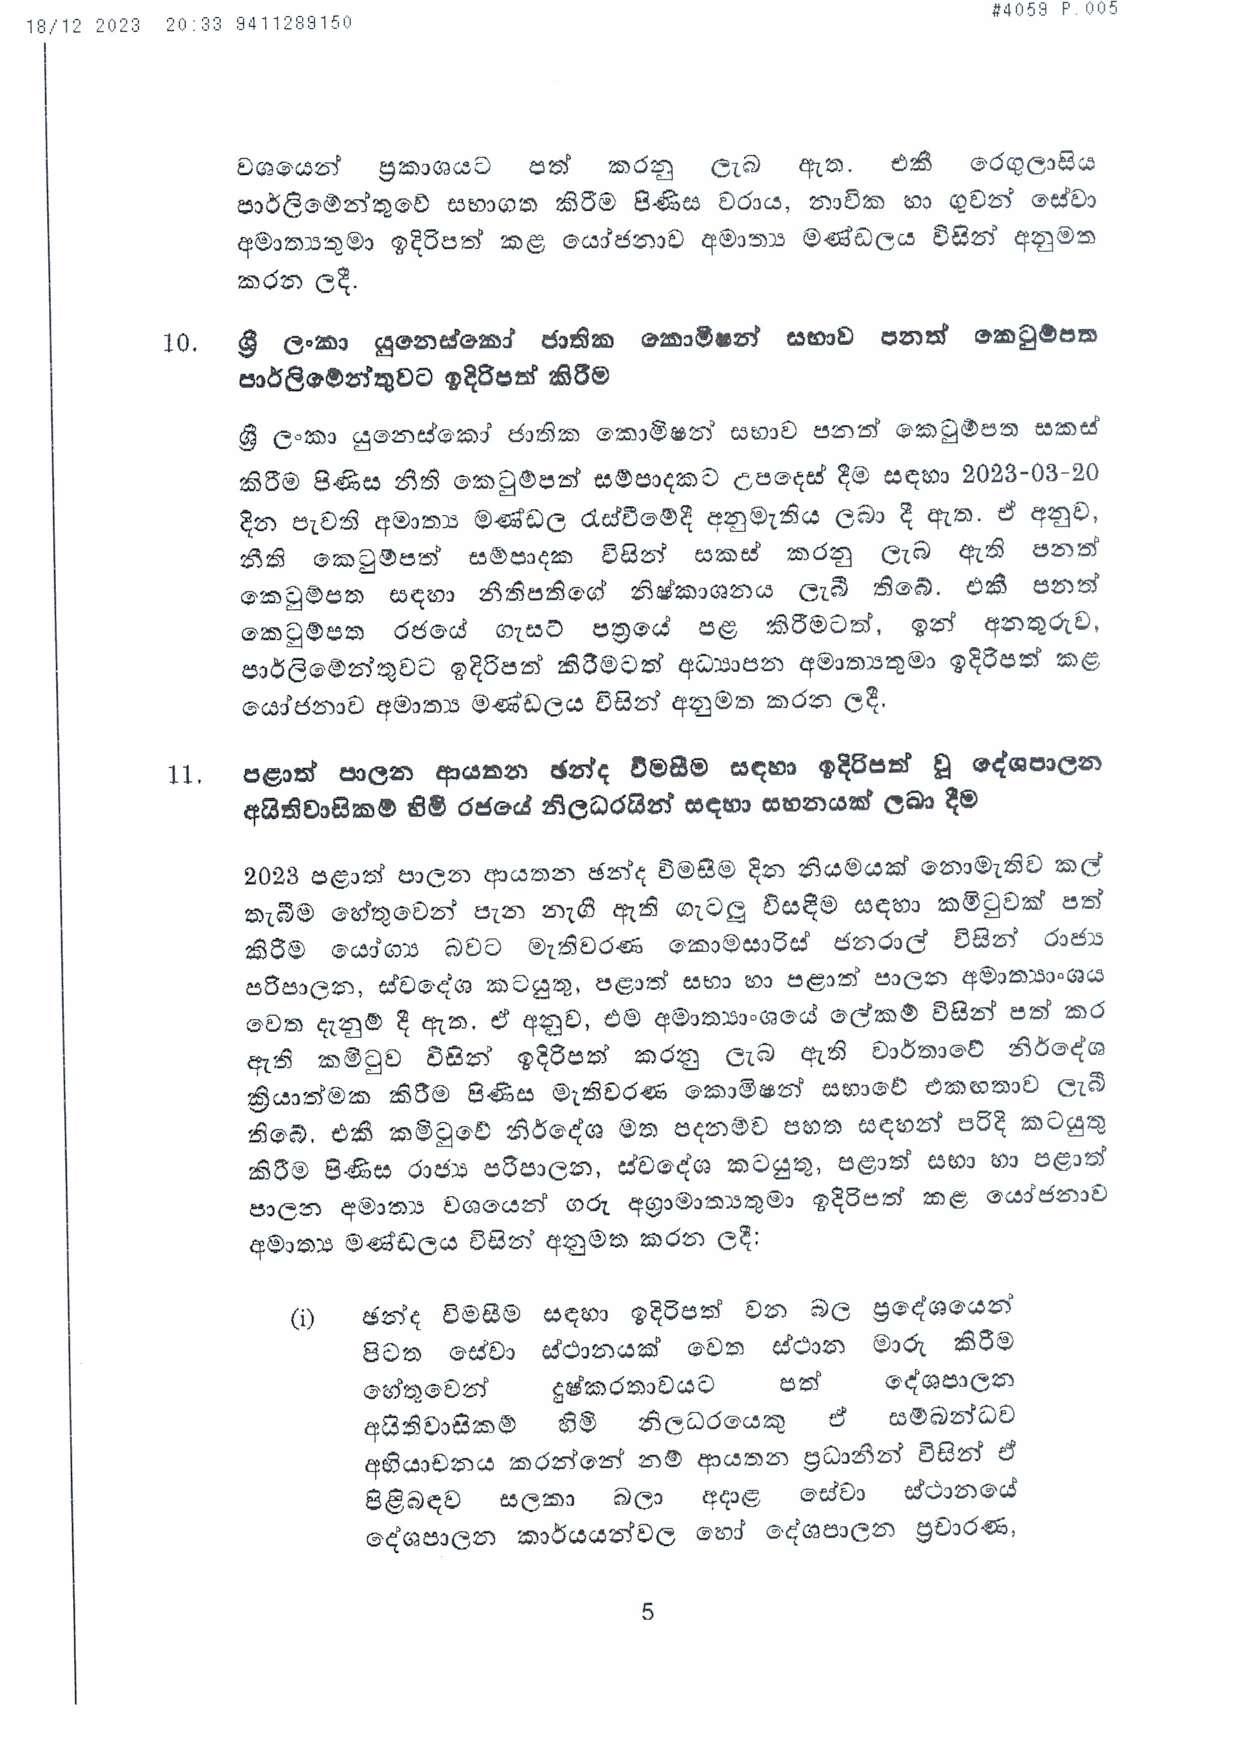 Cabinet Decision on 18.12.2023 page 005